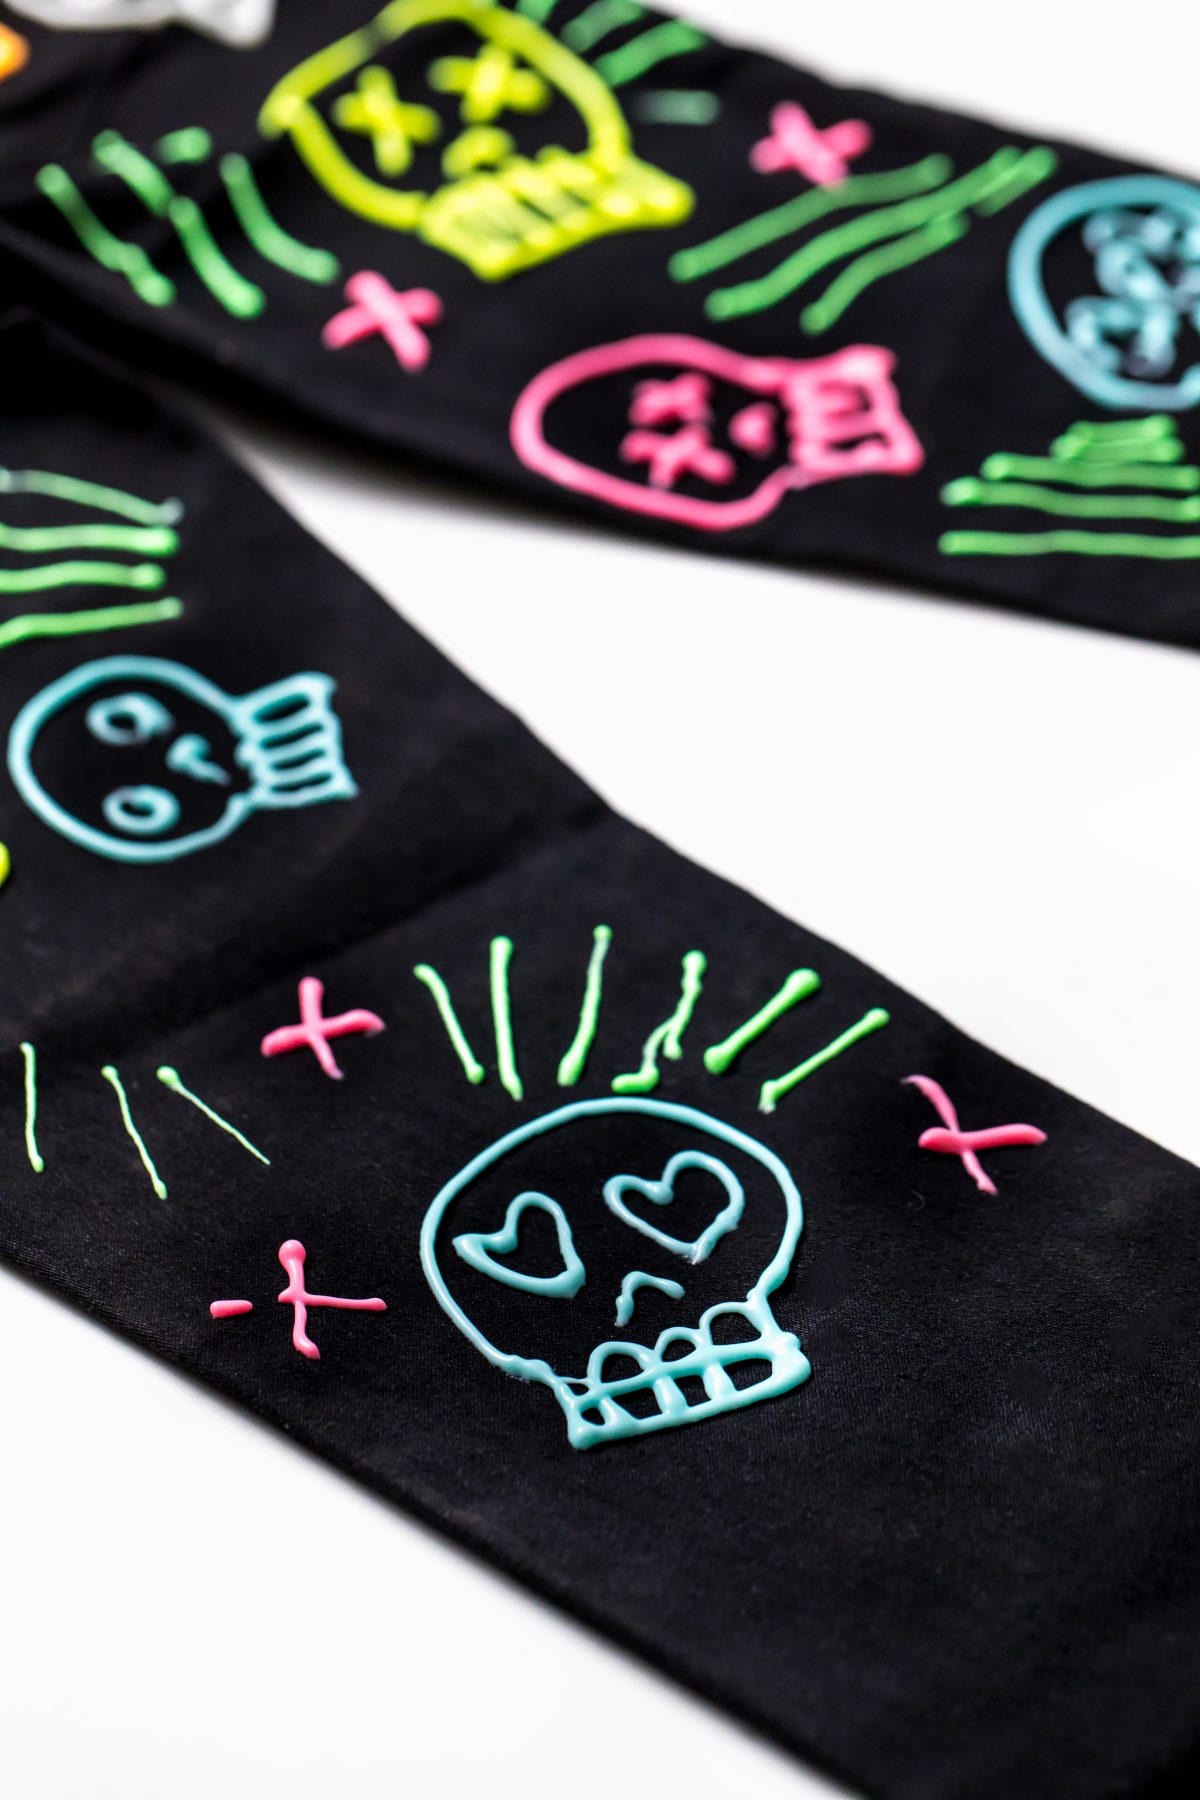 5D4B6456 - Crafty Chica - Glow in the dark Jeans